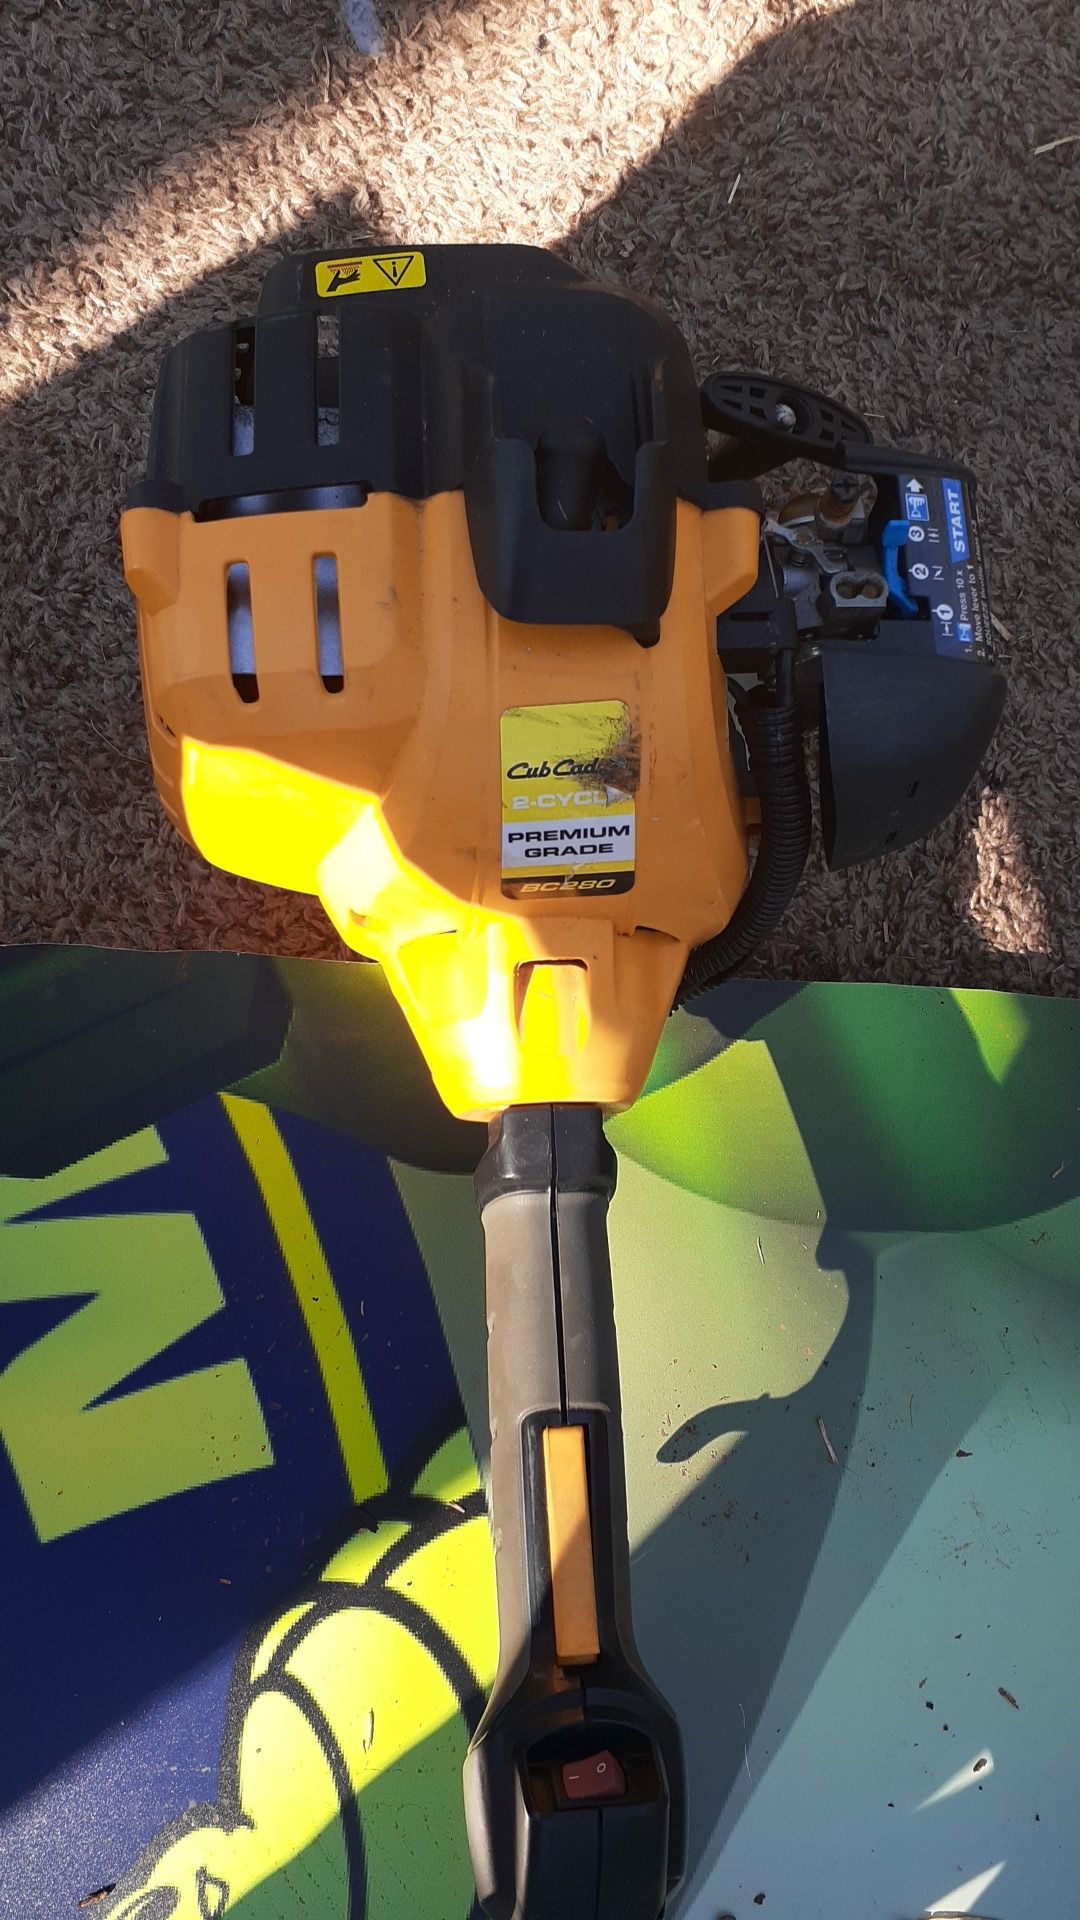 Cub Cadet weed trimmer and saw head